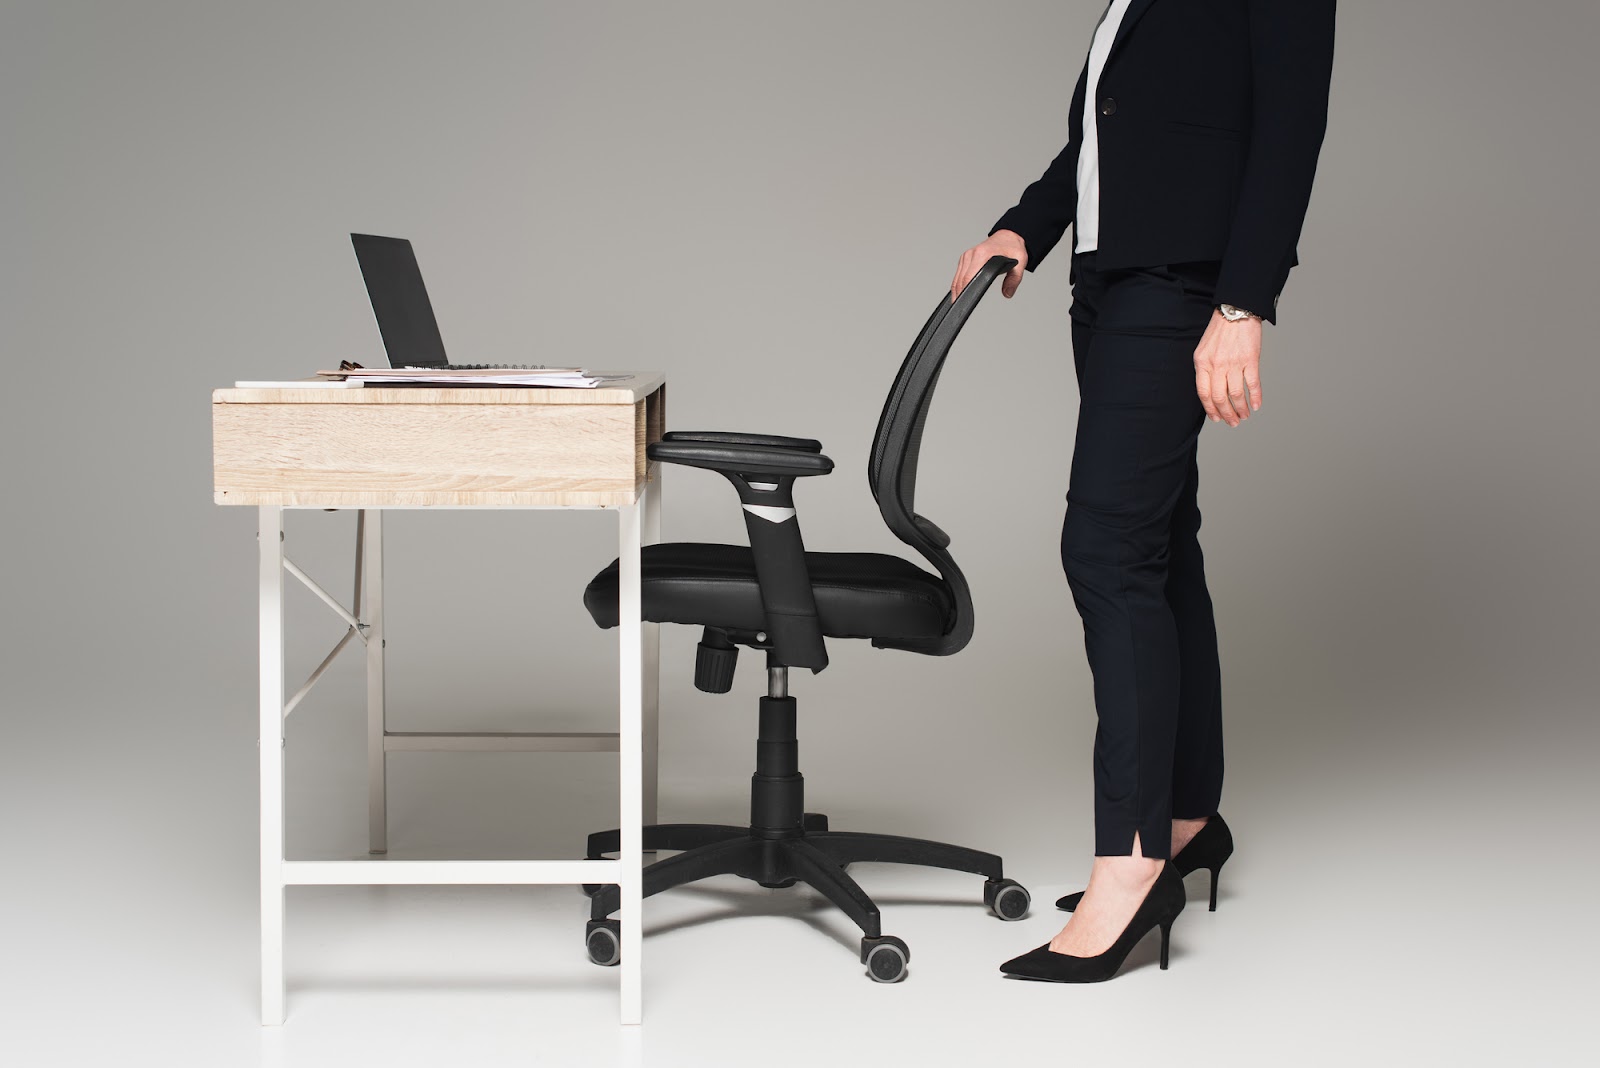 A women standing near an ergonomic office chair with office table